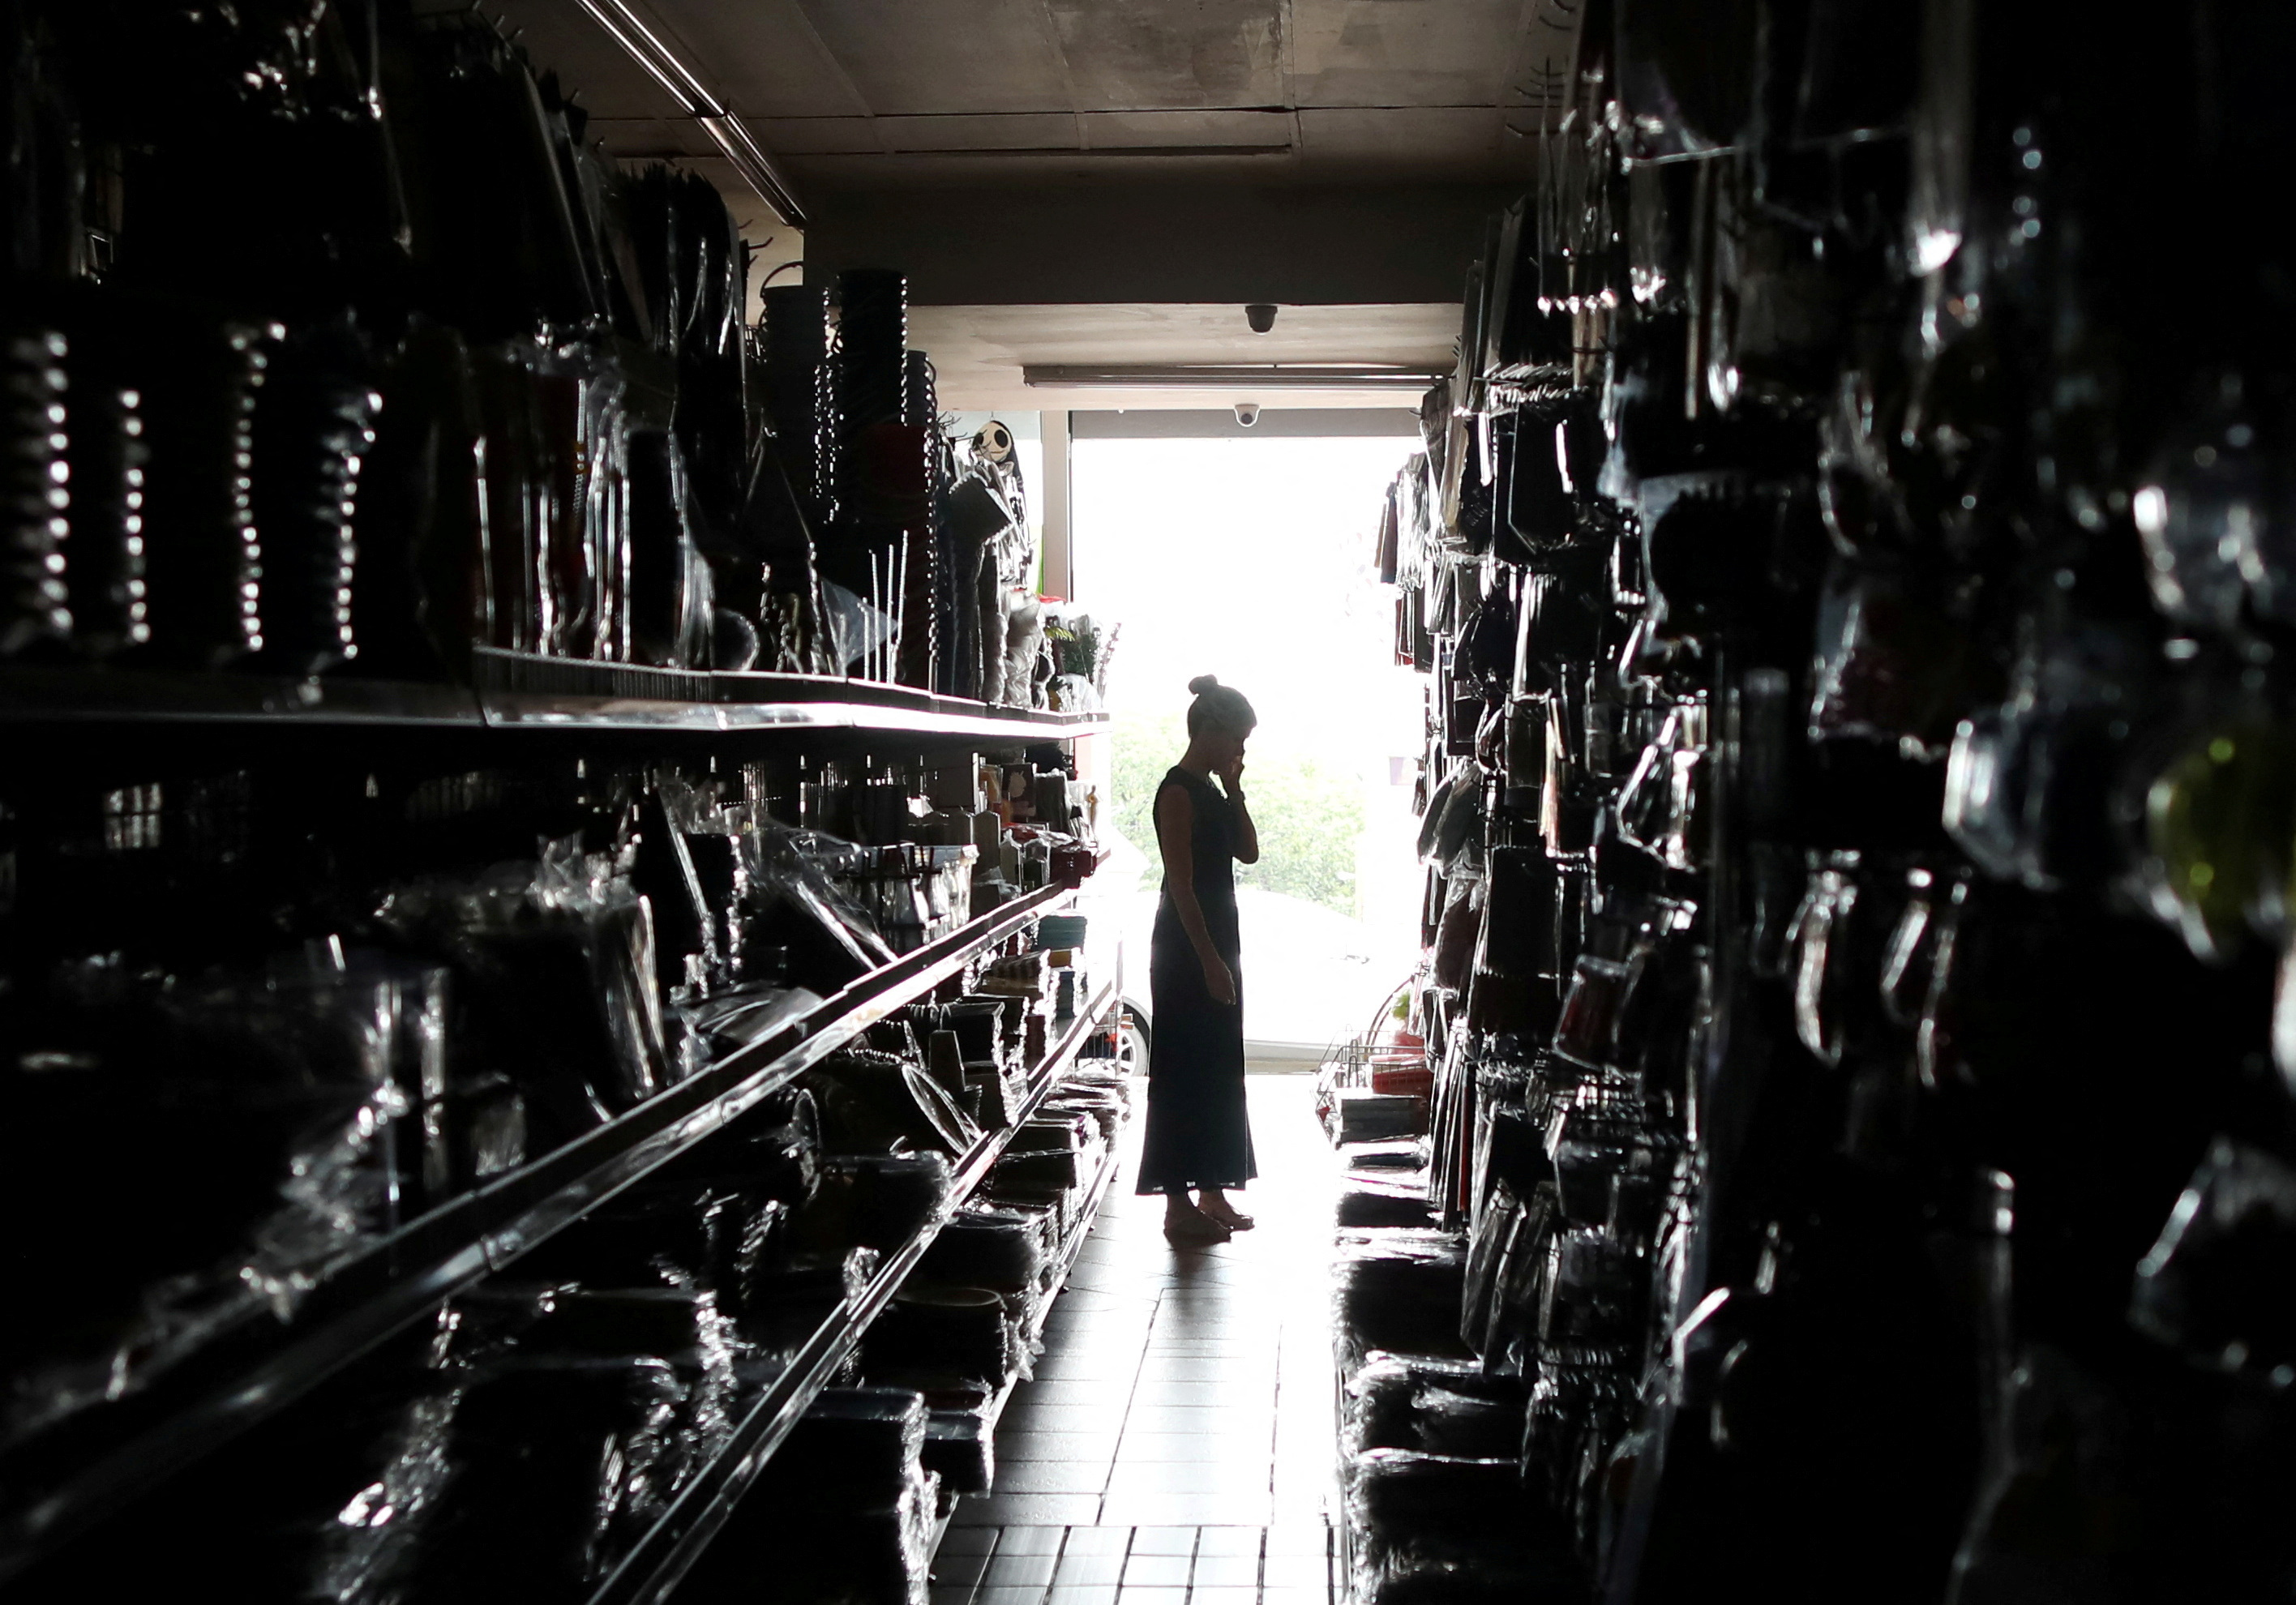 A shopper looks for goods during an electricity load-shedding blackout in Johannesburg